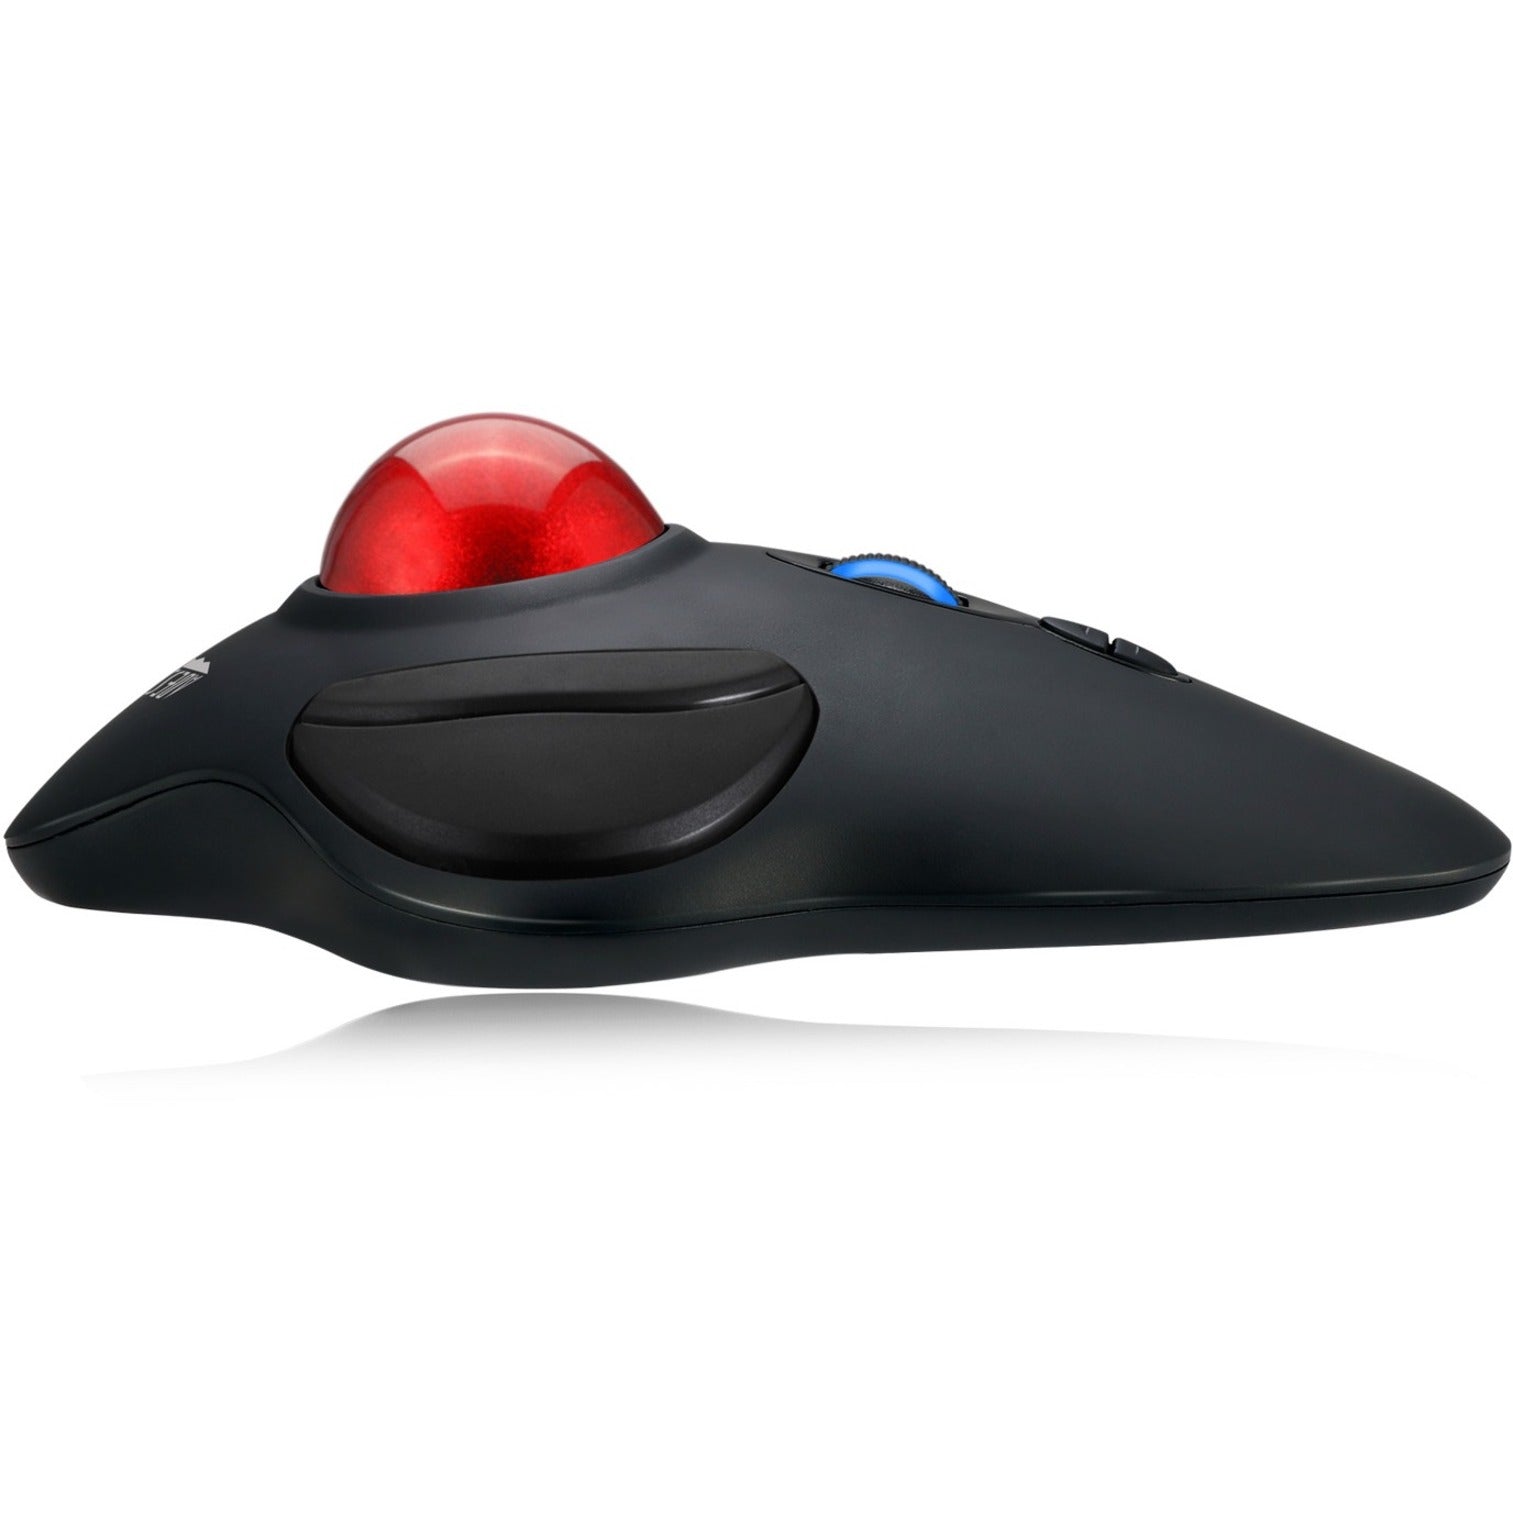 Adesso IMOUSE T40 Wireless Programmable Ergonomic Trackball Mouse, 2.4 GHz Radio Frequency, 4800 dpi